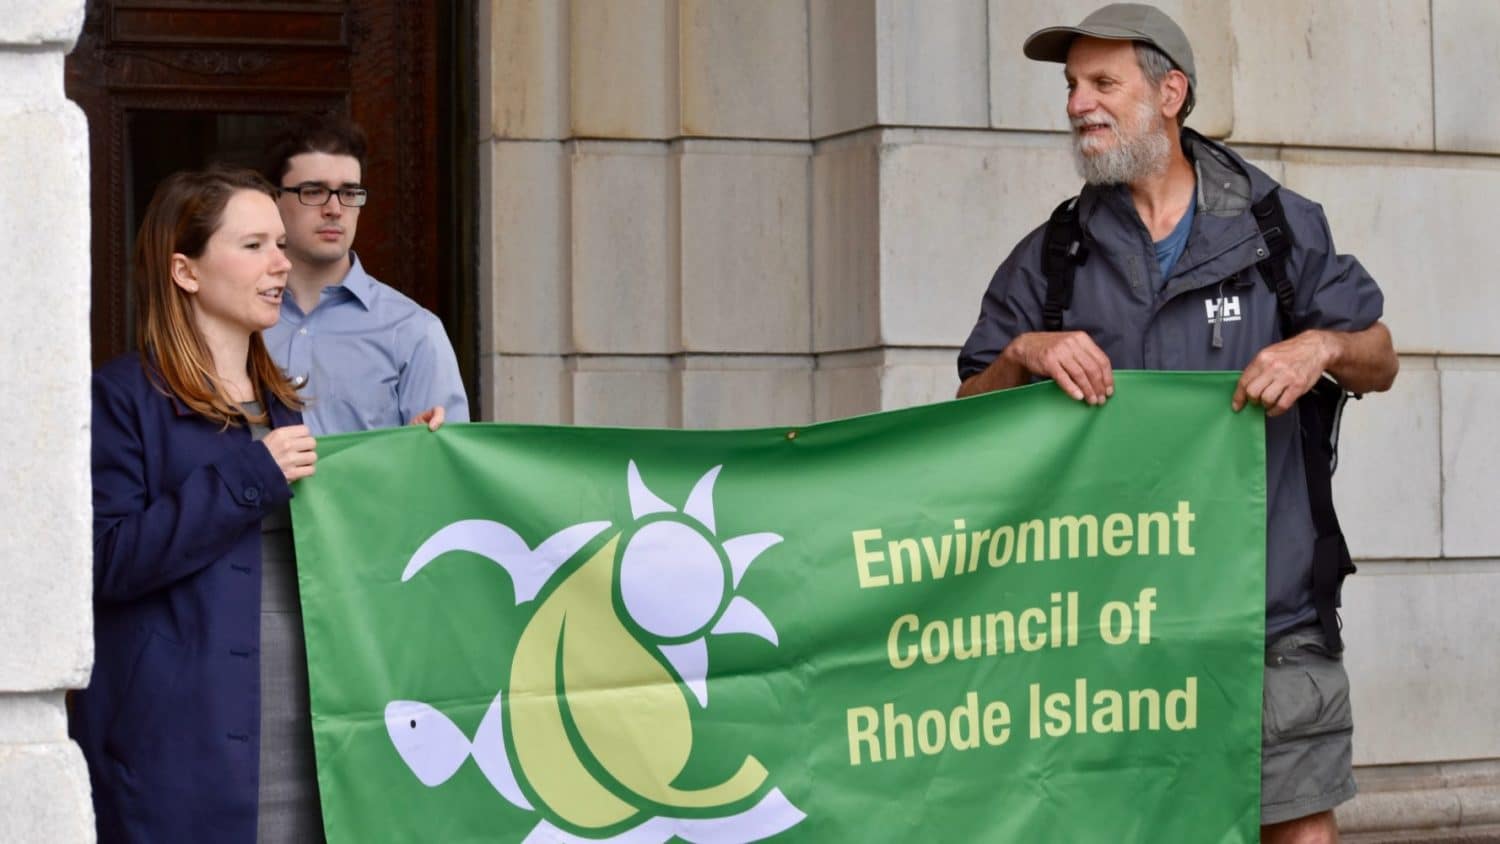 Biomass incineration bill opposed at State House rally